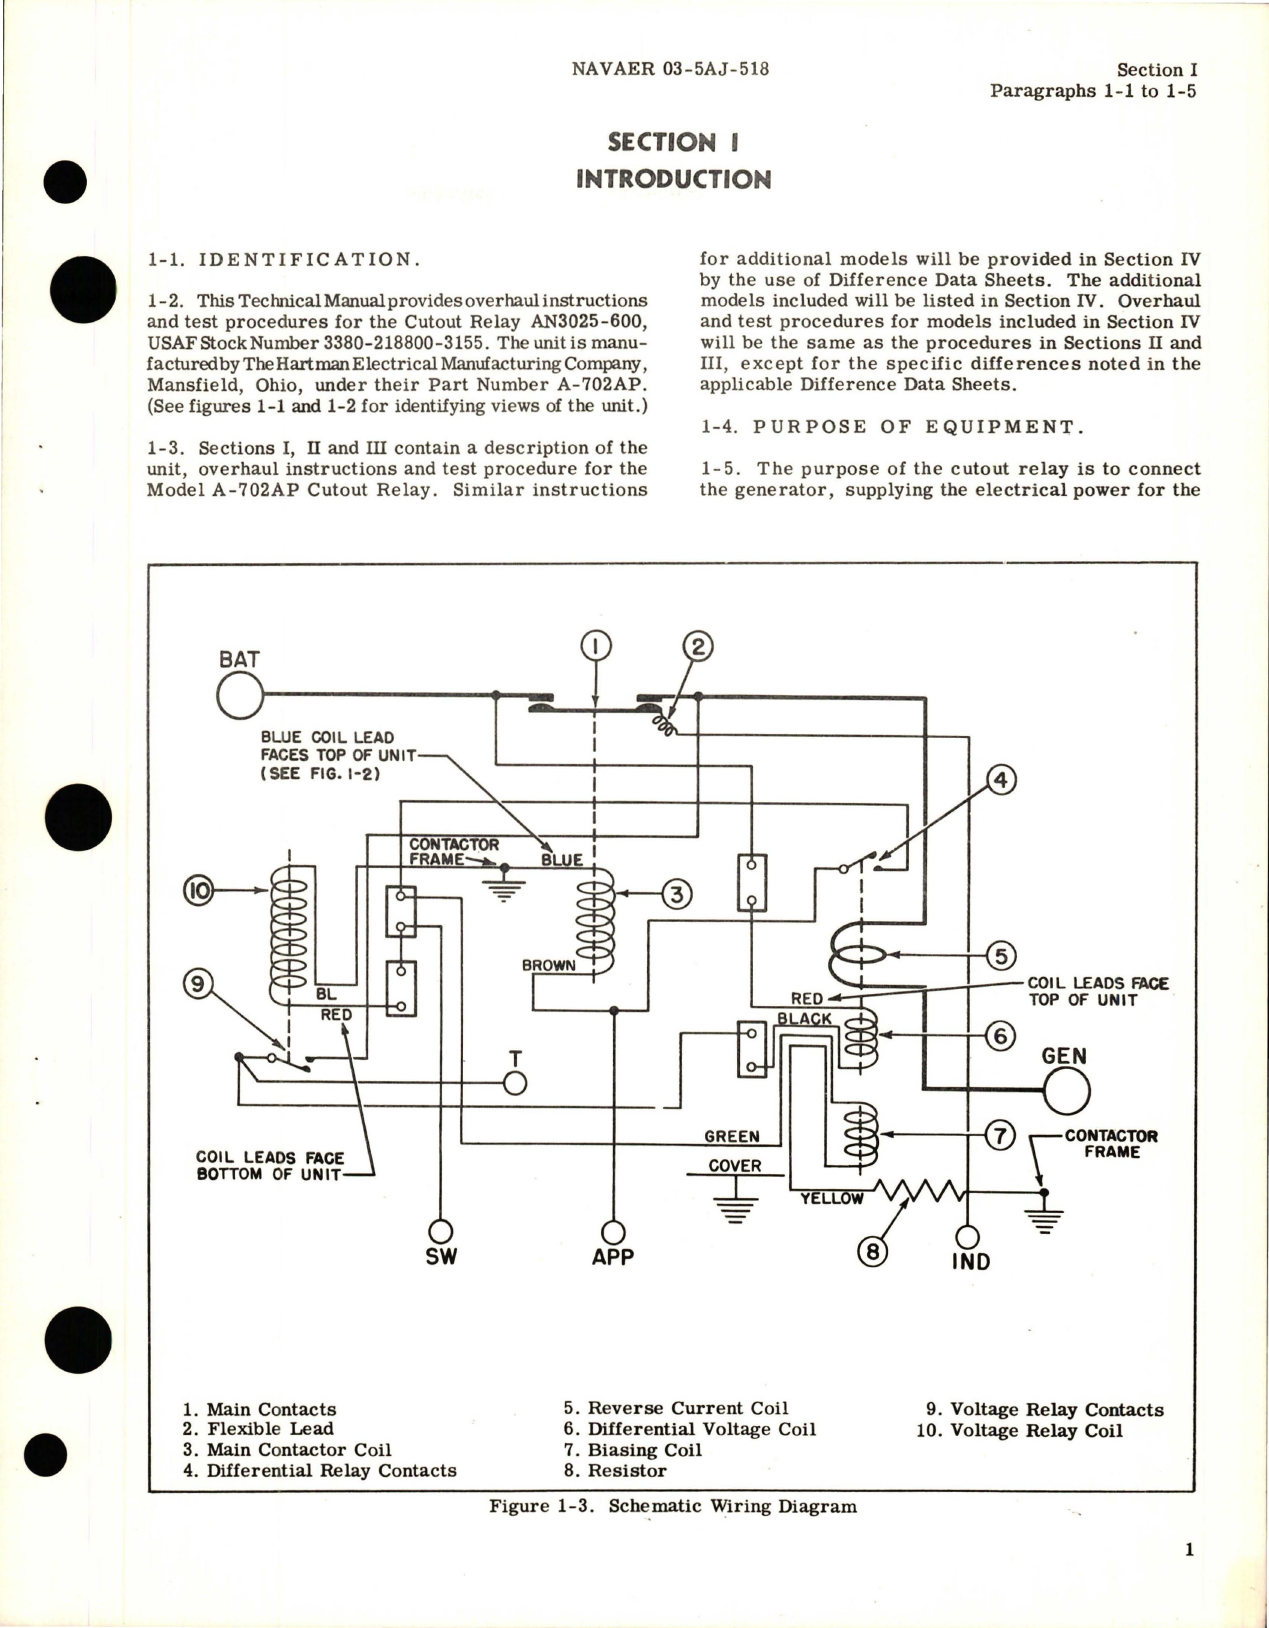 Sample page 5 from AirCorps Library document: Overhaul Instructions for 24 Volt DC System Reverse Current Cutout - Model AN3025-600  - Part A-702AP 